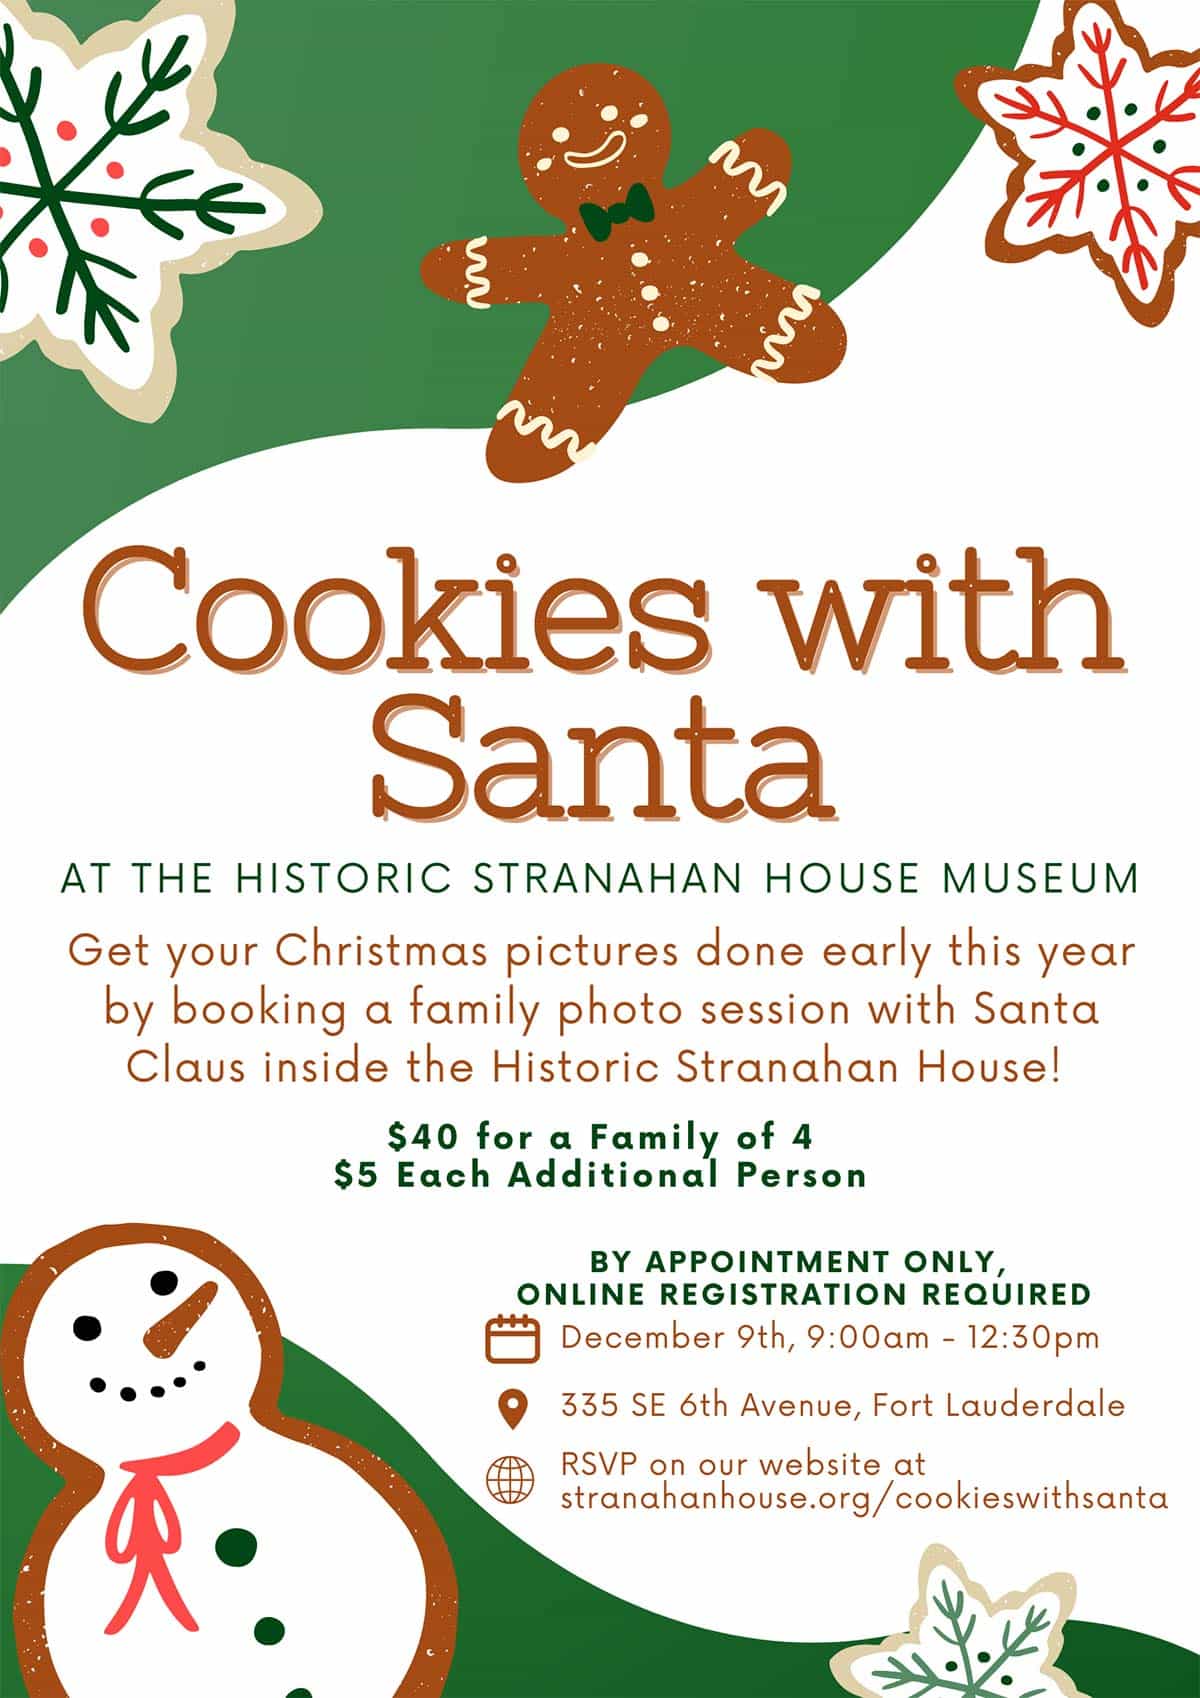 Cookies with Santa at the Historic Stranahan House Museum